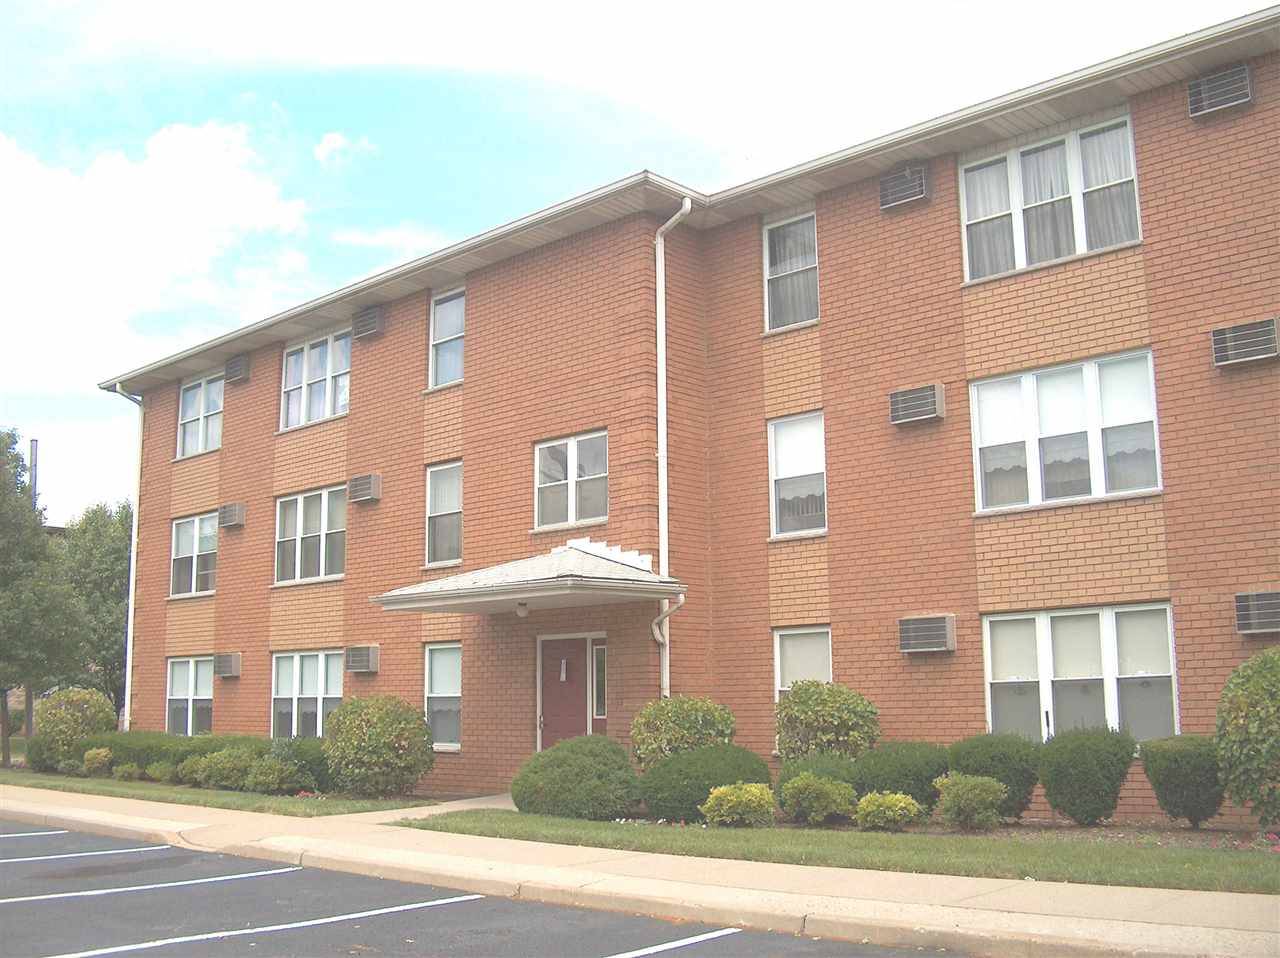 AFFORDABLE ONE BEDROOM CONDO IN QUIET WELL MAINTAINED COMPLEX